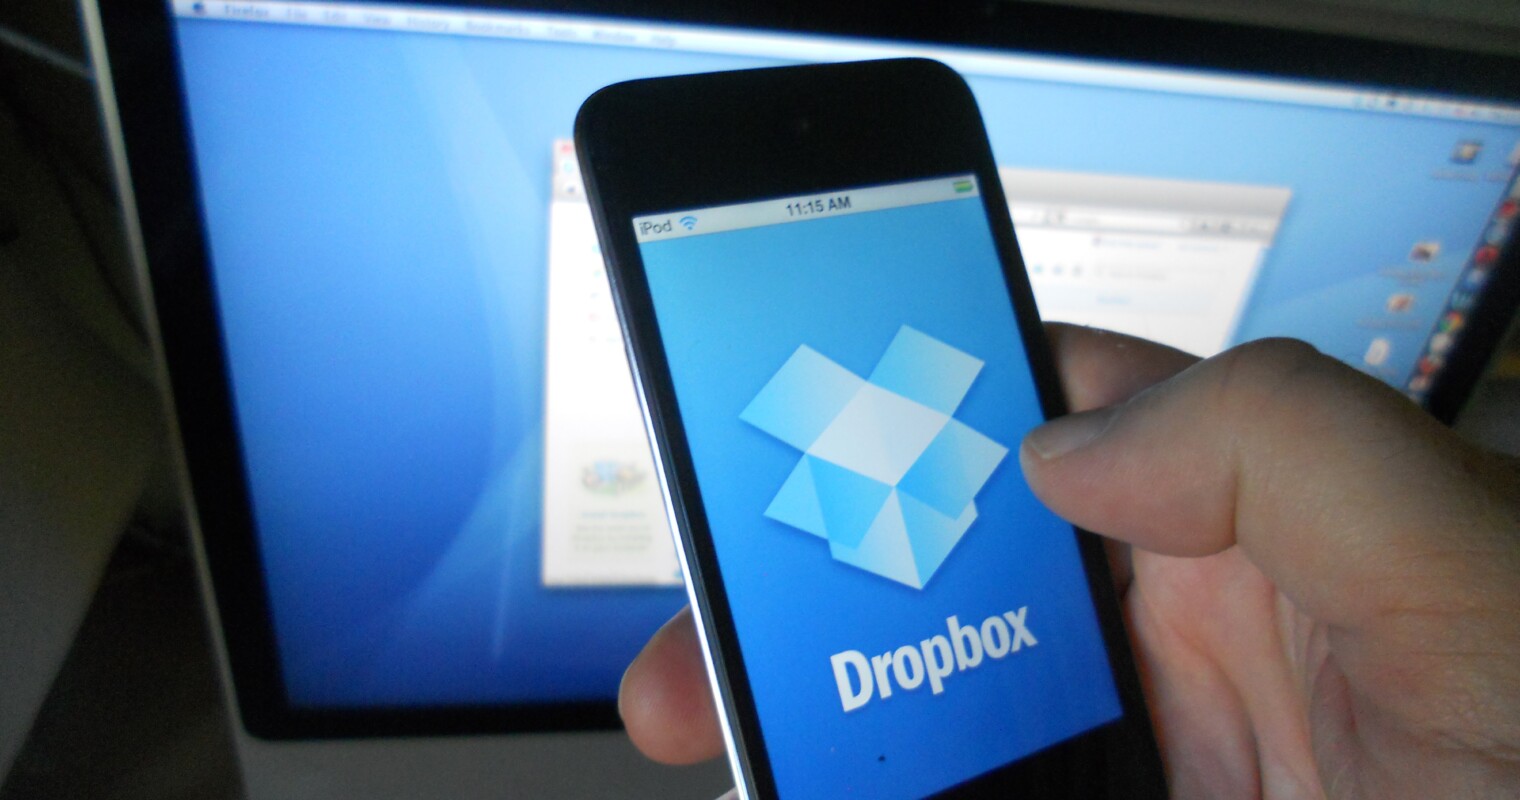 Dropbox Announces ‘Special’ Invite-Only Event in November